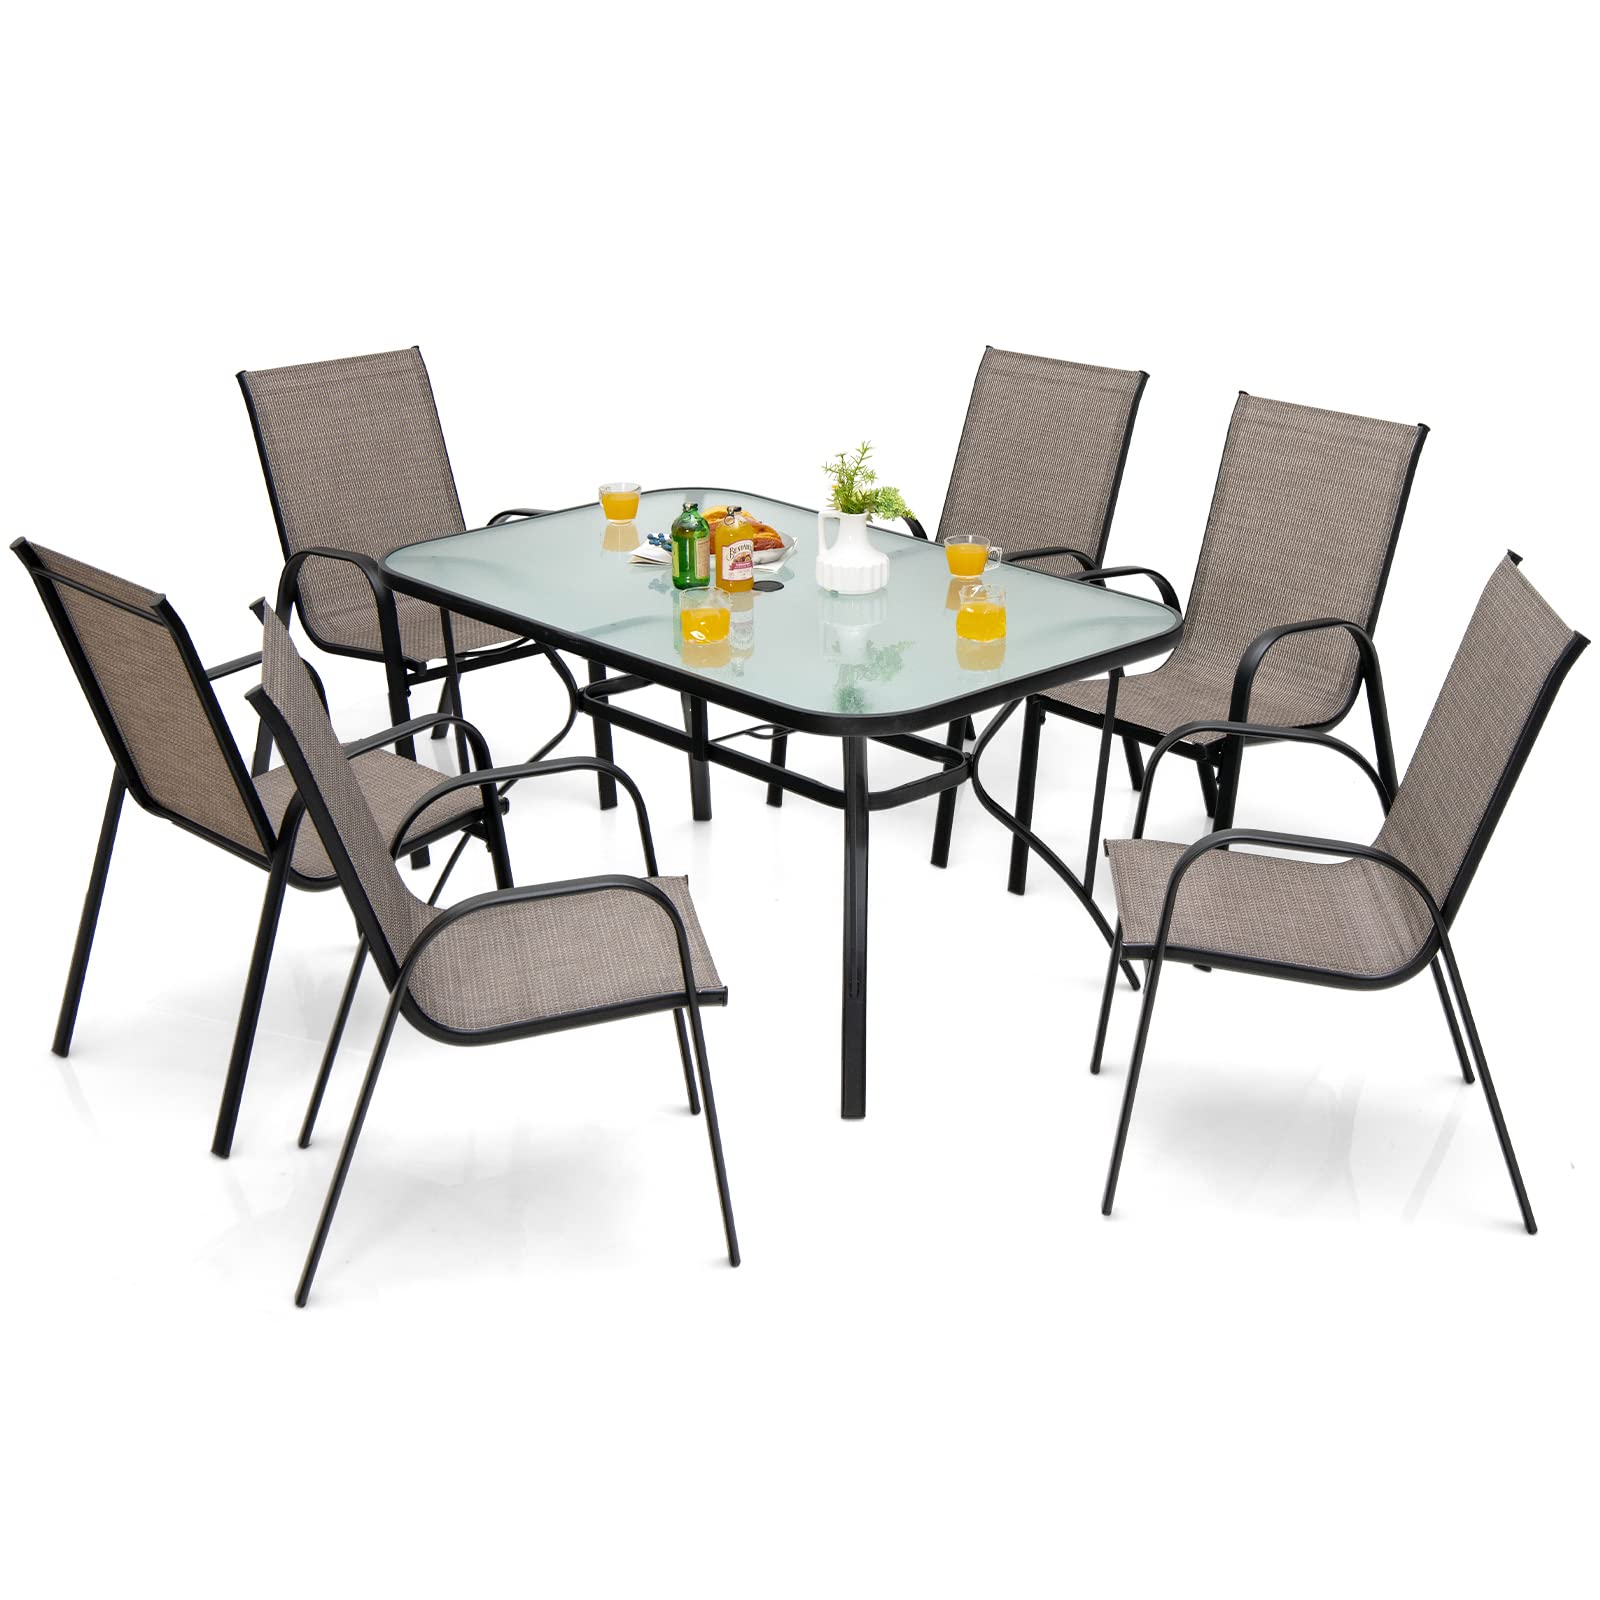 Giantex 7 Piece Patio Dining Set, Outdoor Dining Table Set with 6 Stackable Chairs